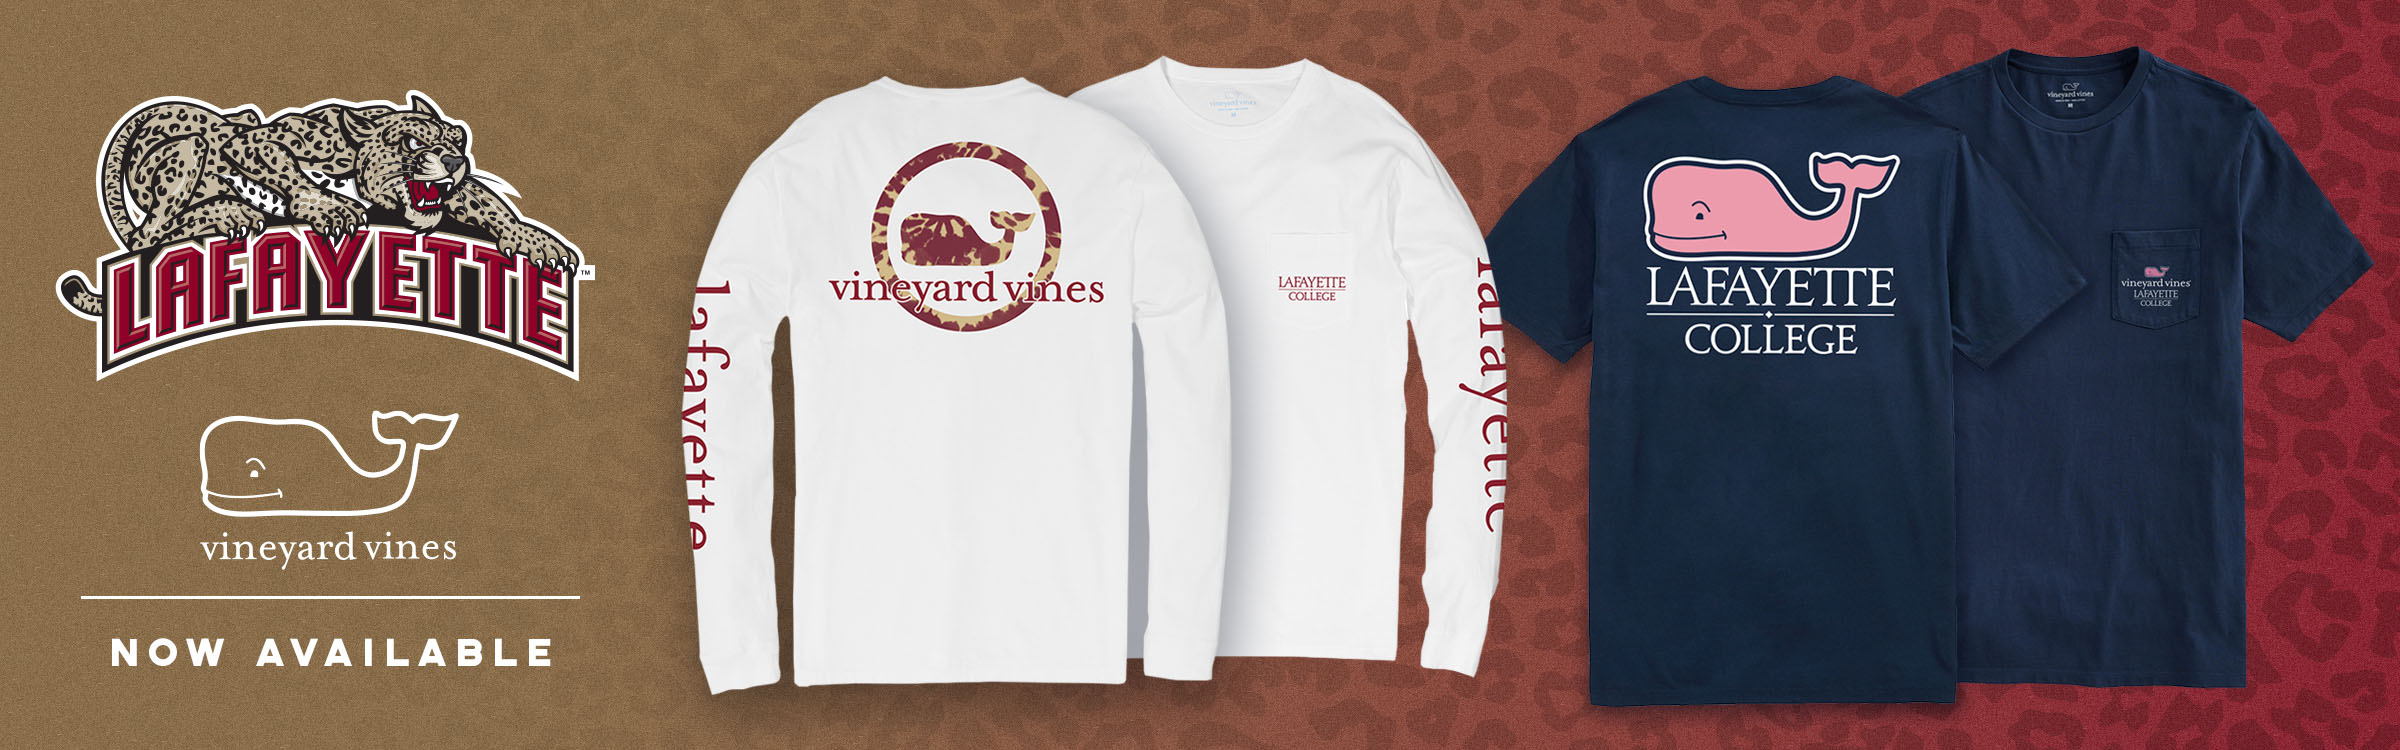 Vineyard Vines now available